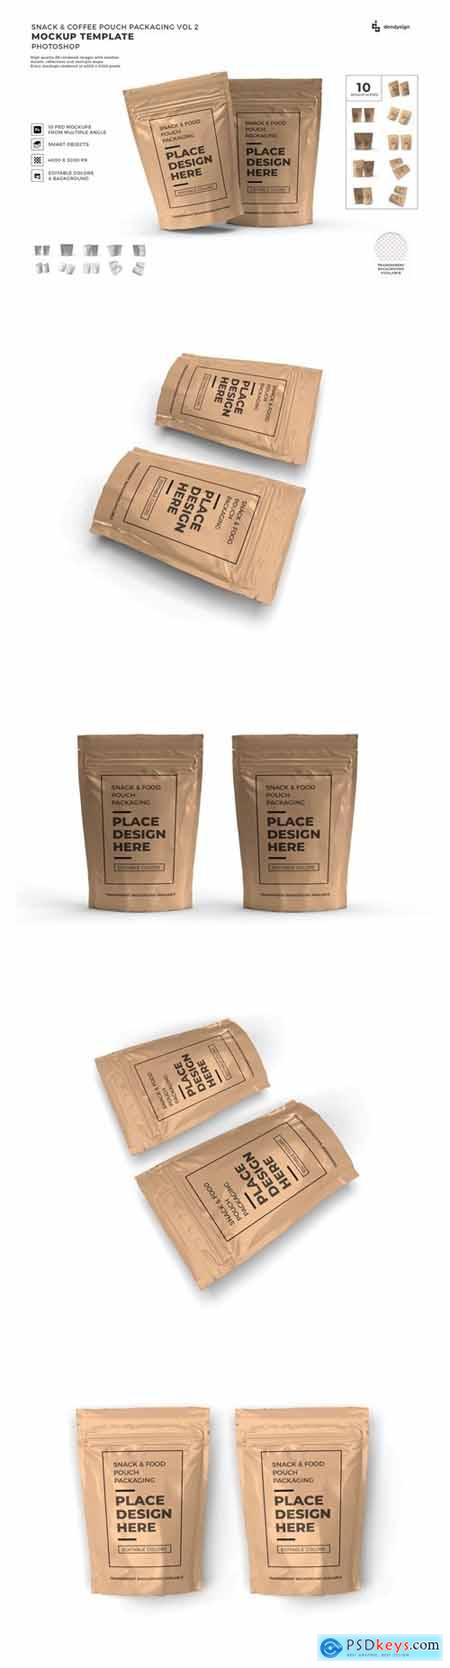 Food Pouch Packaging Mockup Template Set Vol 2